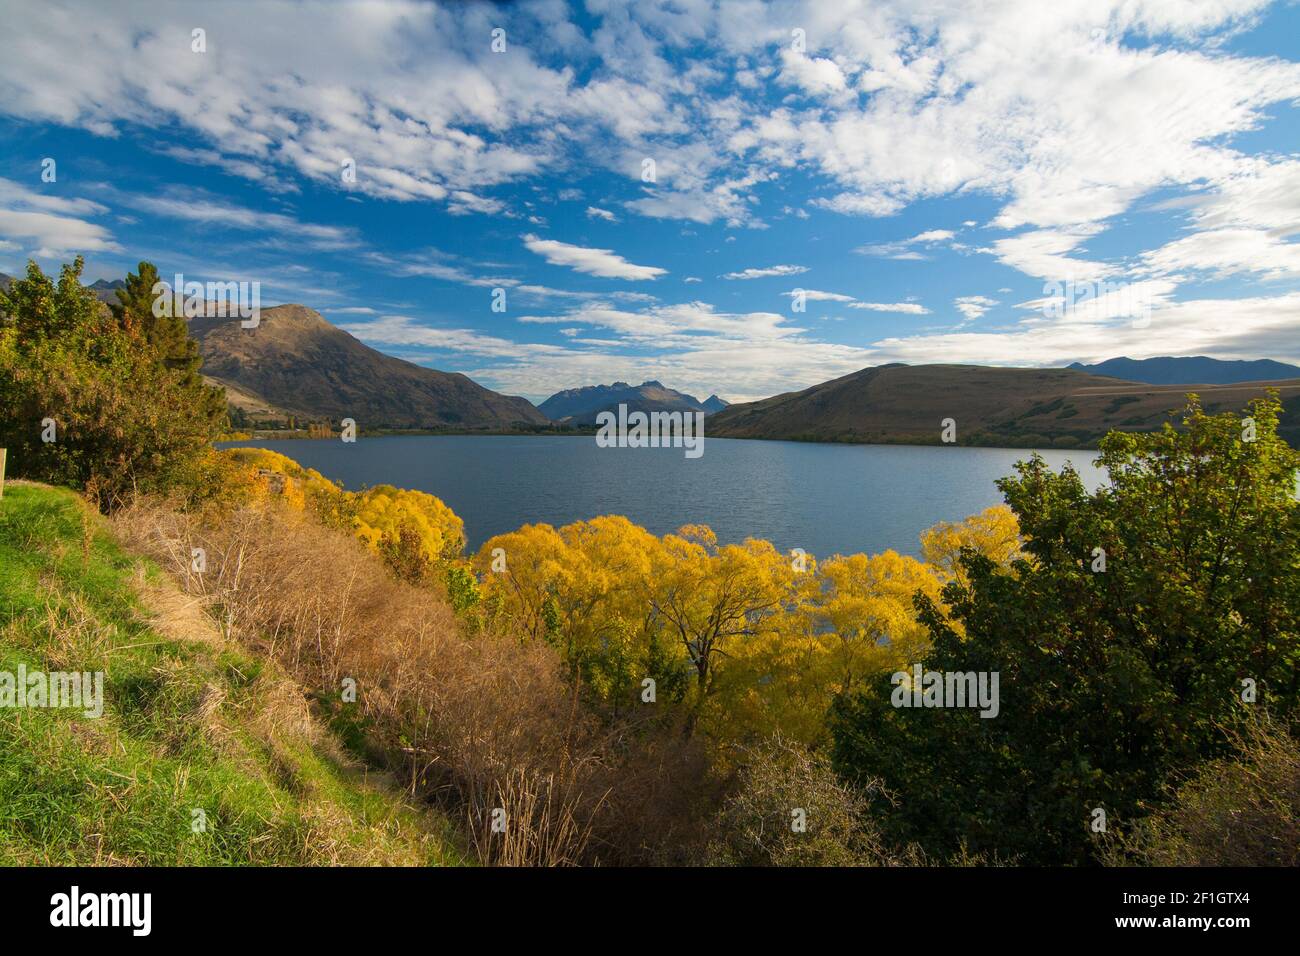 Lake Hayes, village Arrowtown, Central Otago region. Autumn landscape colourful scenery with trees, lake and golden hills Stock Photo